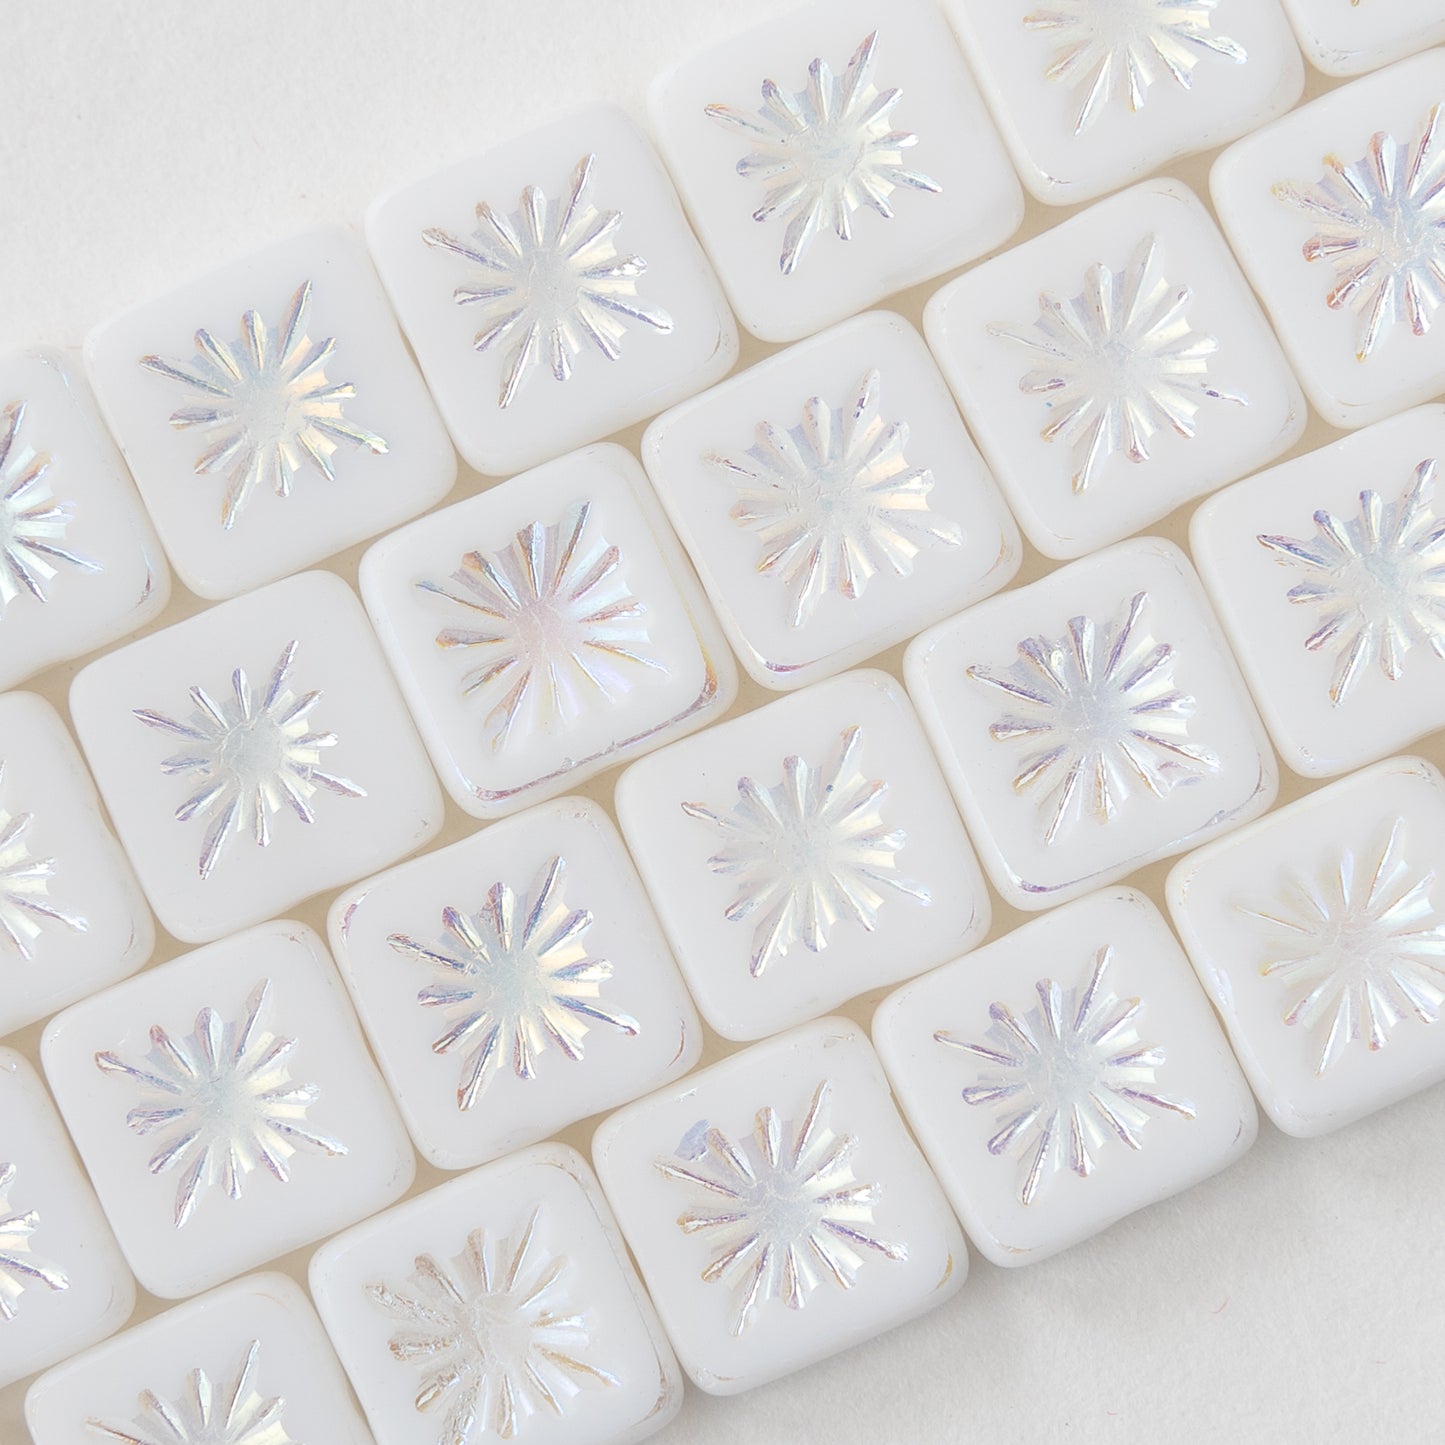 10mm Glass Tile Beads - Opaque White - 10